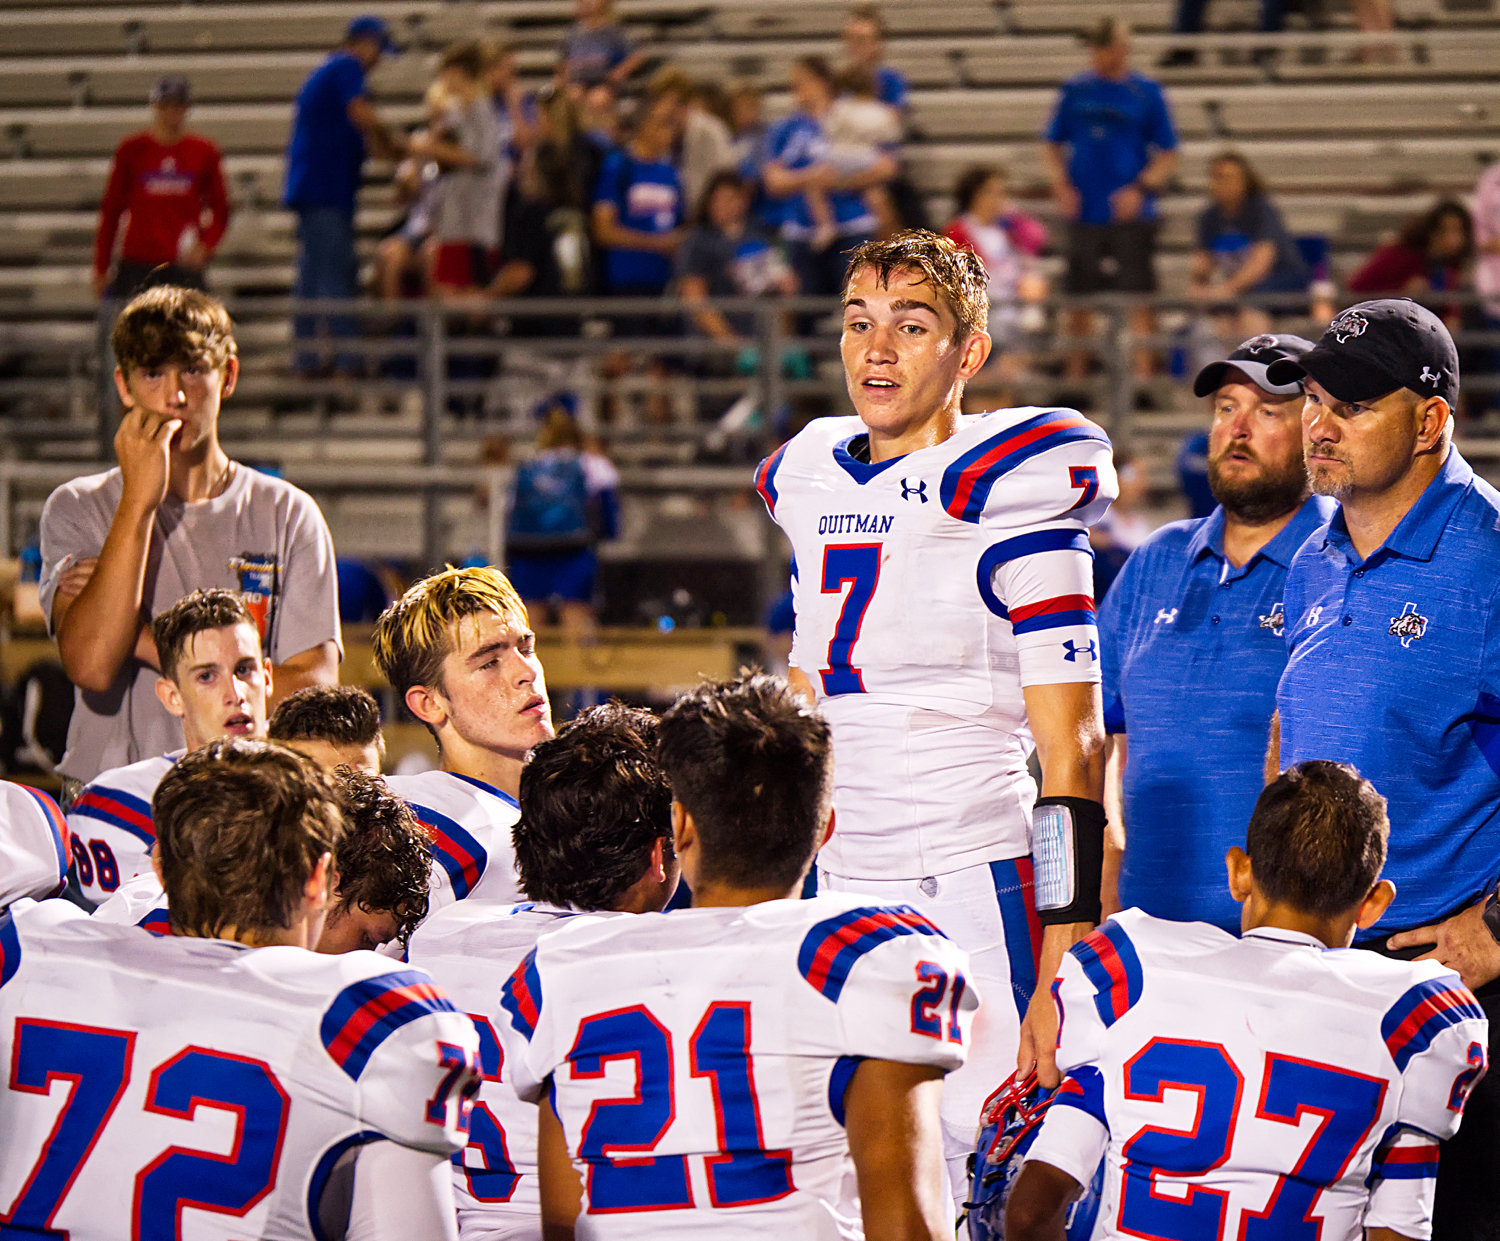 Ben Burroughs, 7, of Quitman addresses his teammates after Friday’s loss.